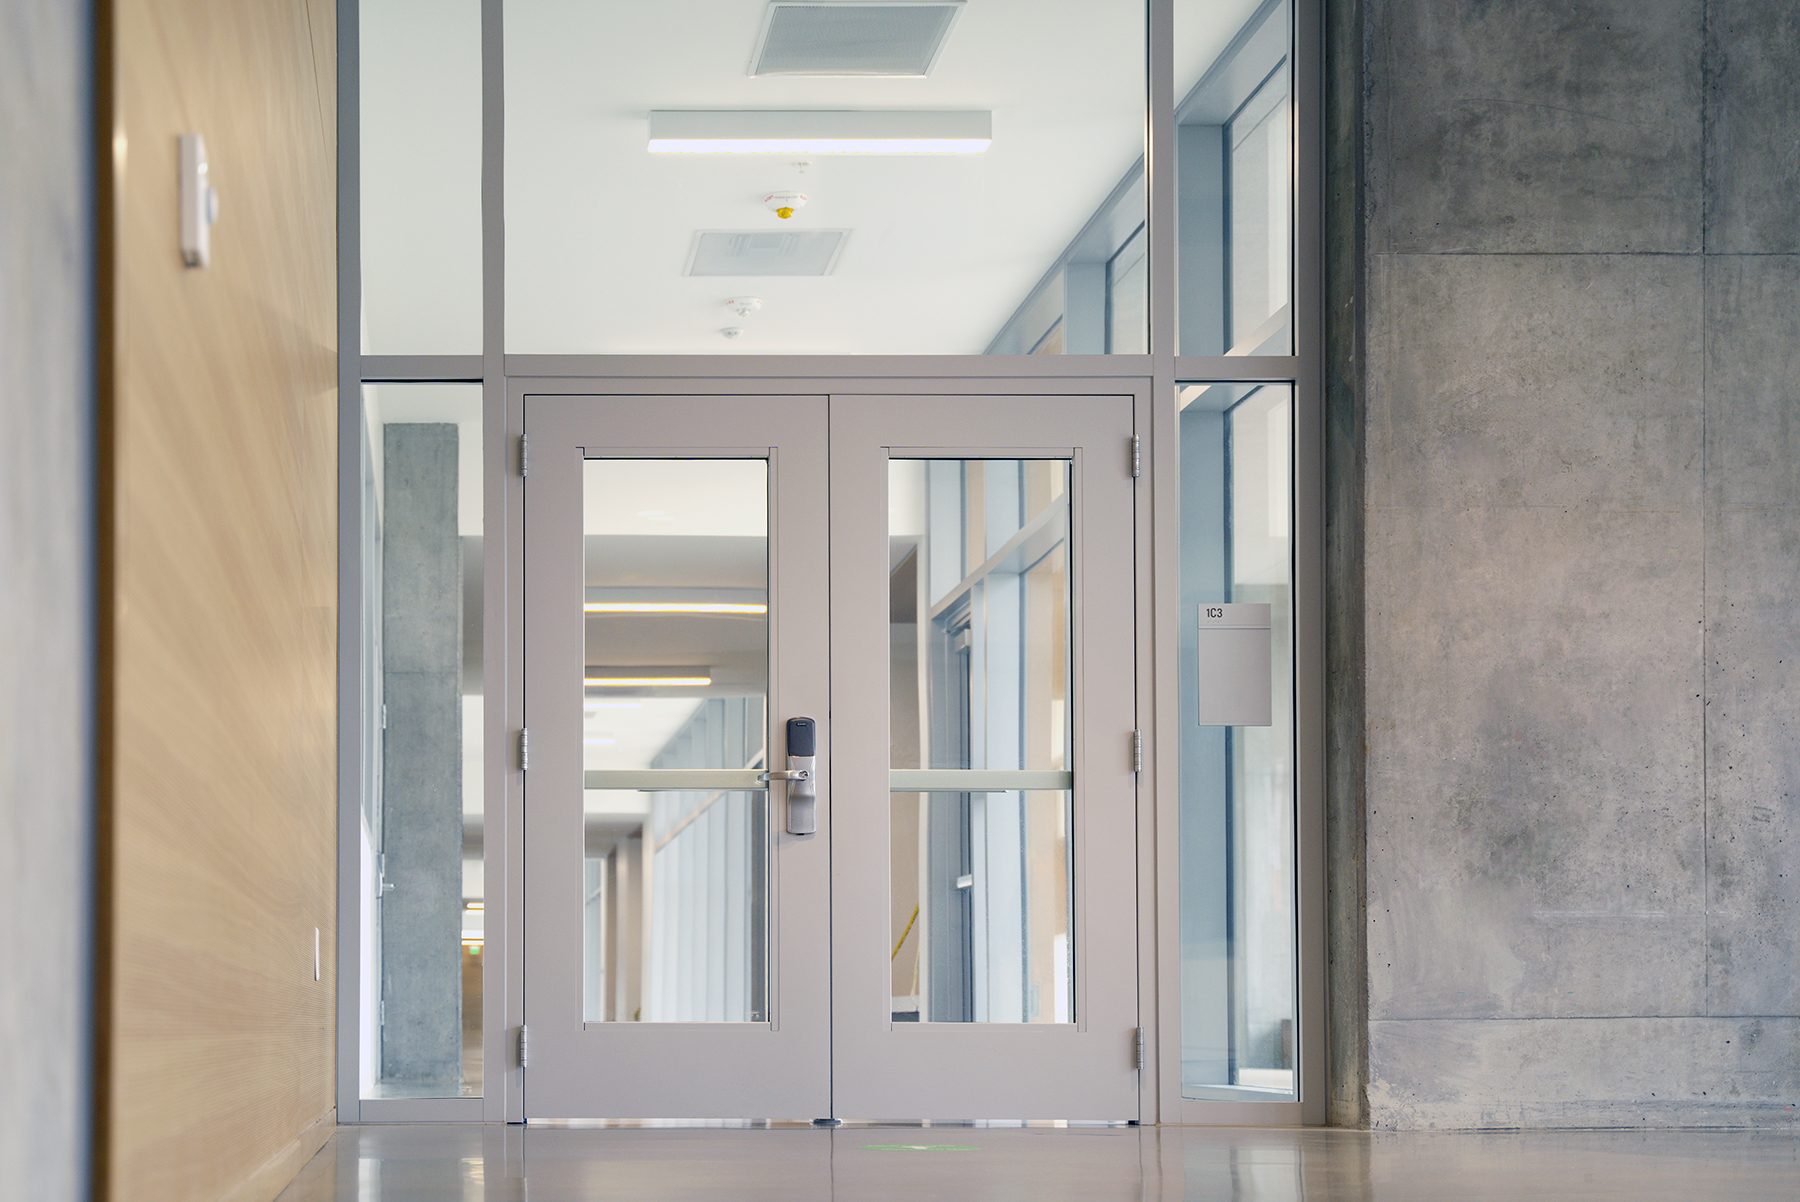 100 square inch door vision lites are a thing of the past thanks to SuperLite II-XL 60 used in the 60 minute temperature rise pair doors. SuperLite II-XL 60 is also used in the surrounding wall for maximum vision and transparency.